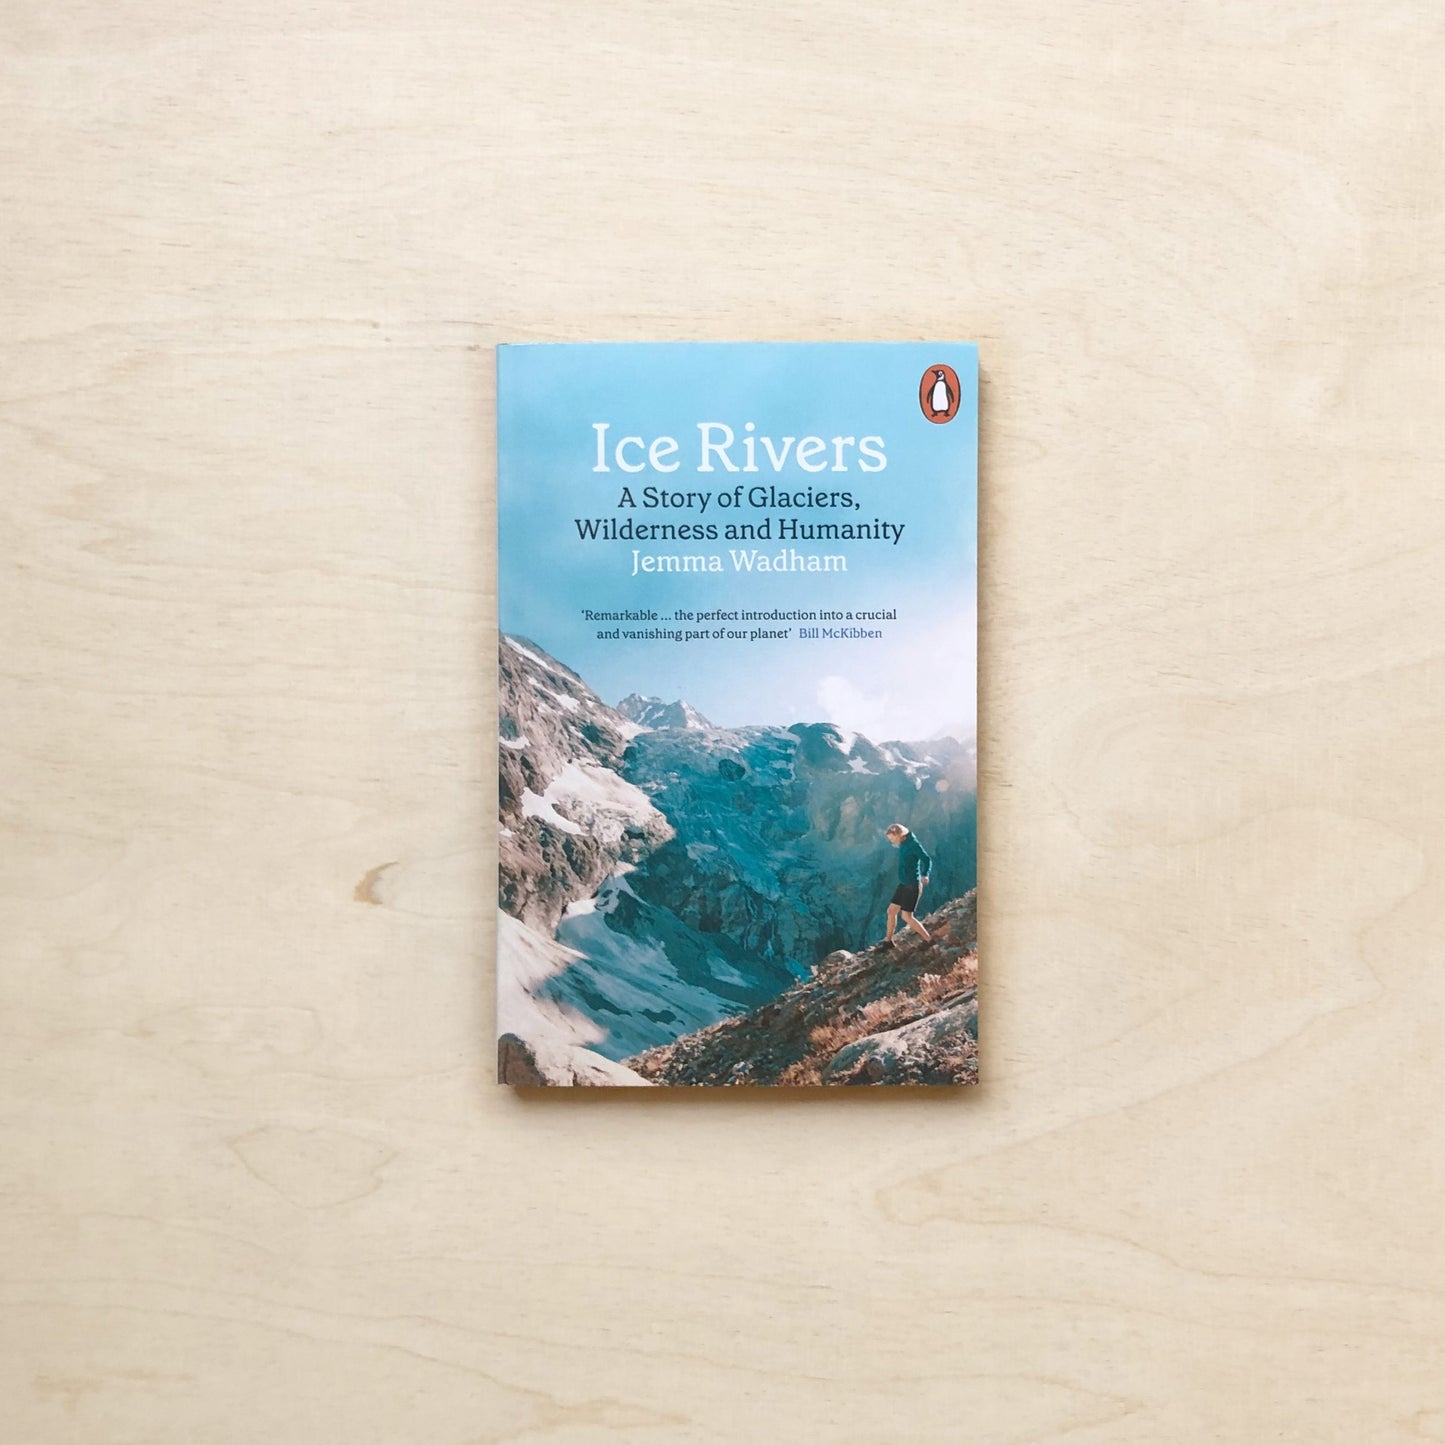 Ice Rivers - A Story of Glaciers, Wilderness and Humanity